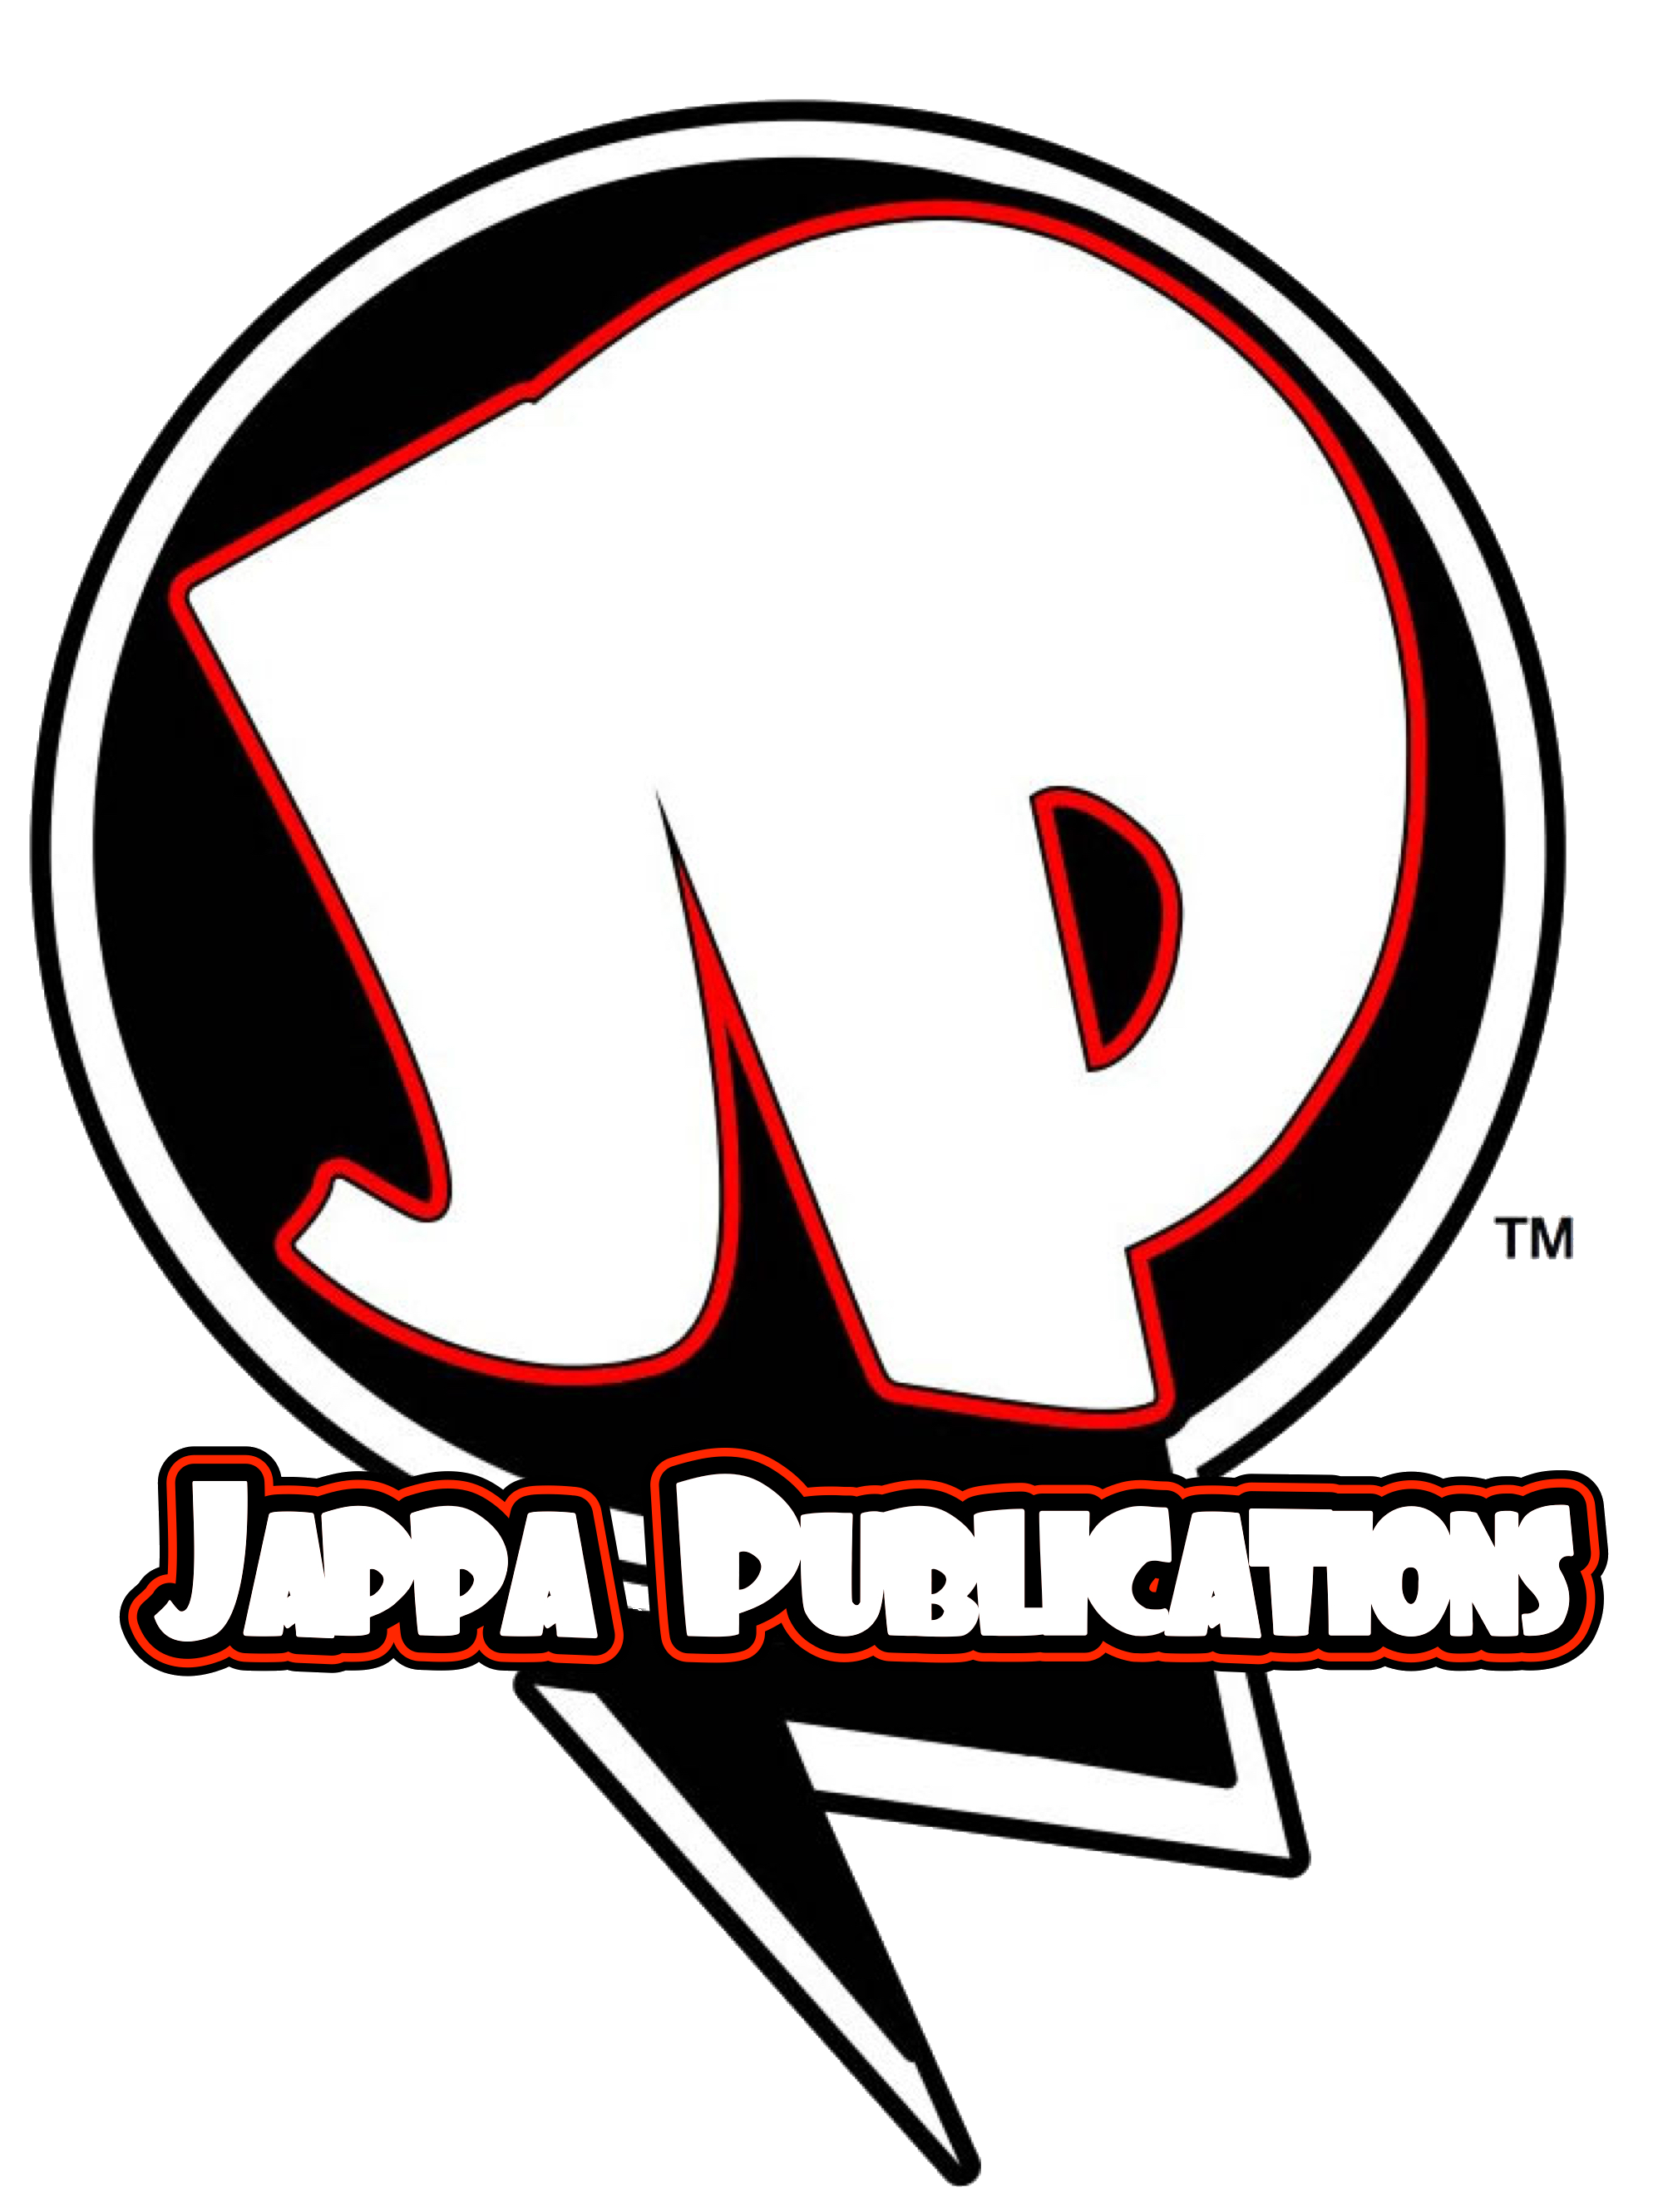 Welcome to Jappa Publications